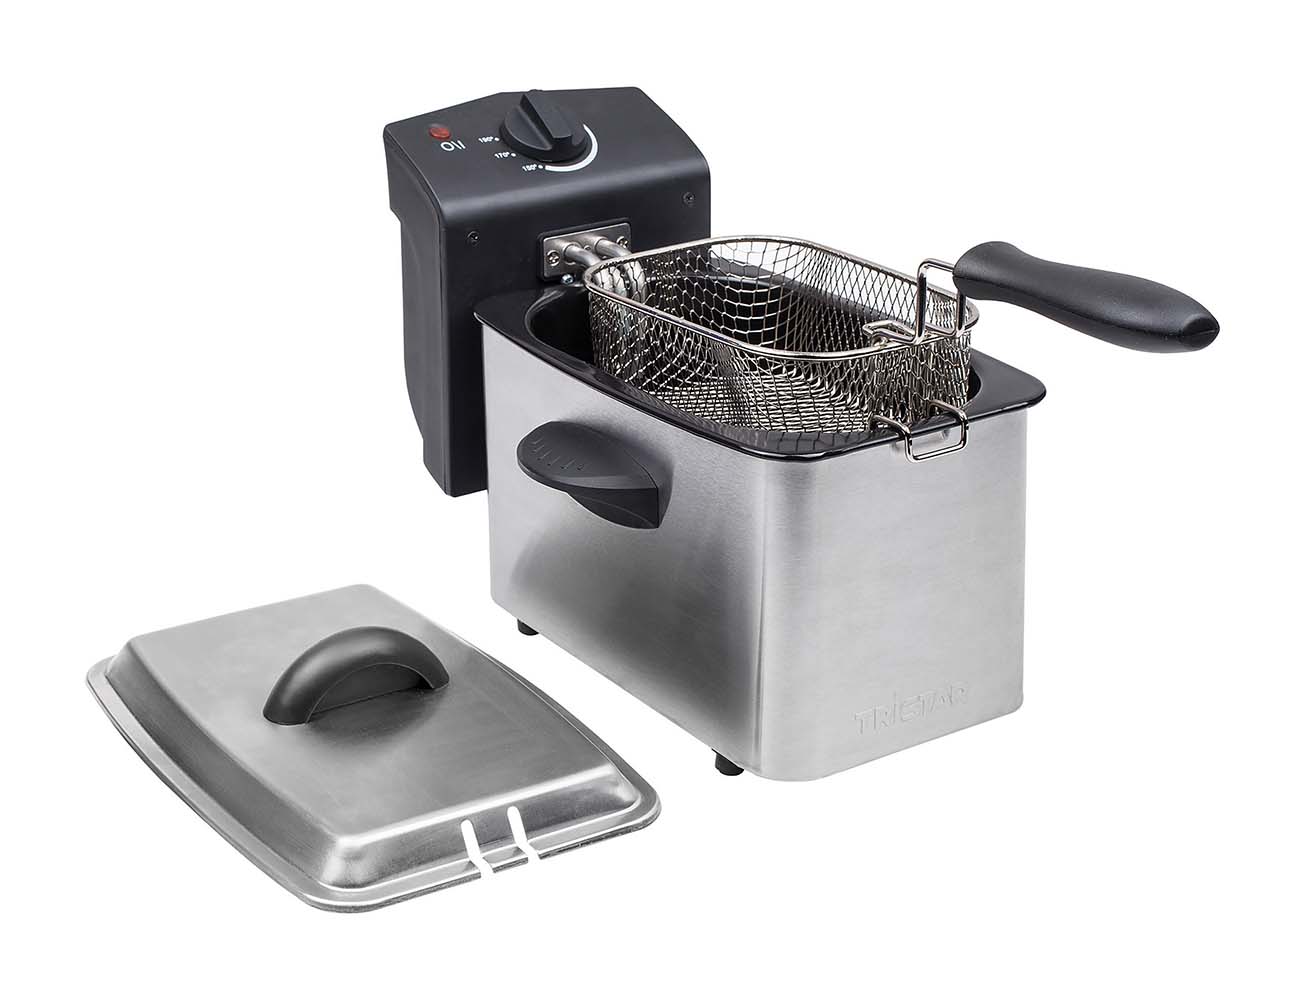 8500515 Handy, compact deep fryer. Ideal for frying smaller portions of fries and snacks. The compact size makes this deep fryer ideal for travel, camping or on a boat. The removable inside pan makes the deep fryer easy to clean. Fitted with an adjustable thermostat (up to 190 degrees) and overheating safety cut out. 800 Watts, 230 Volts.